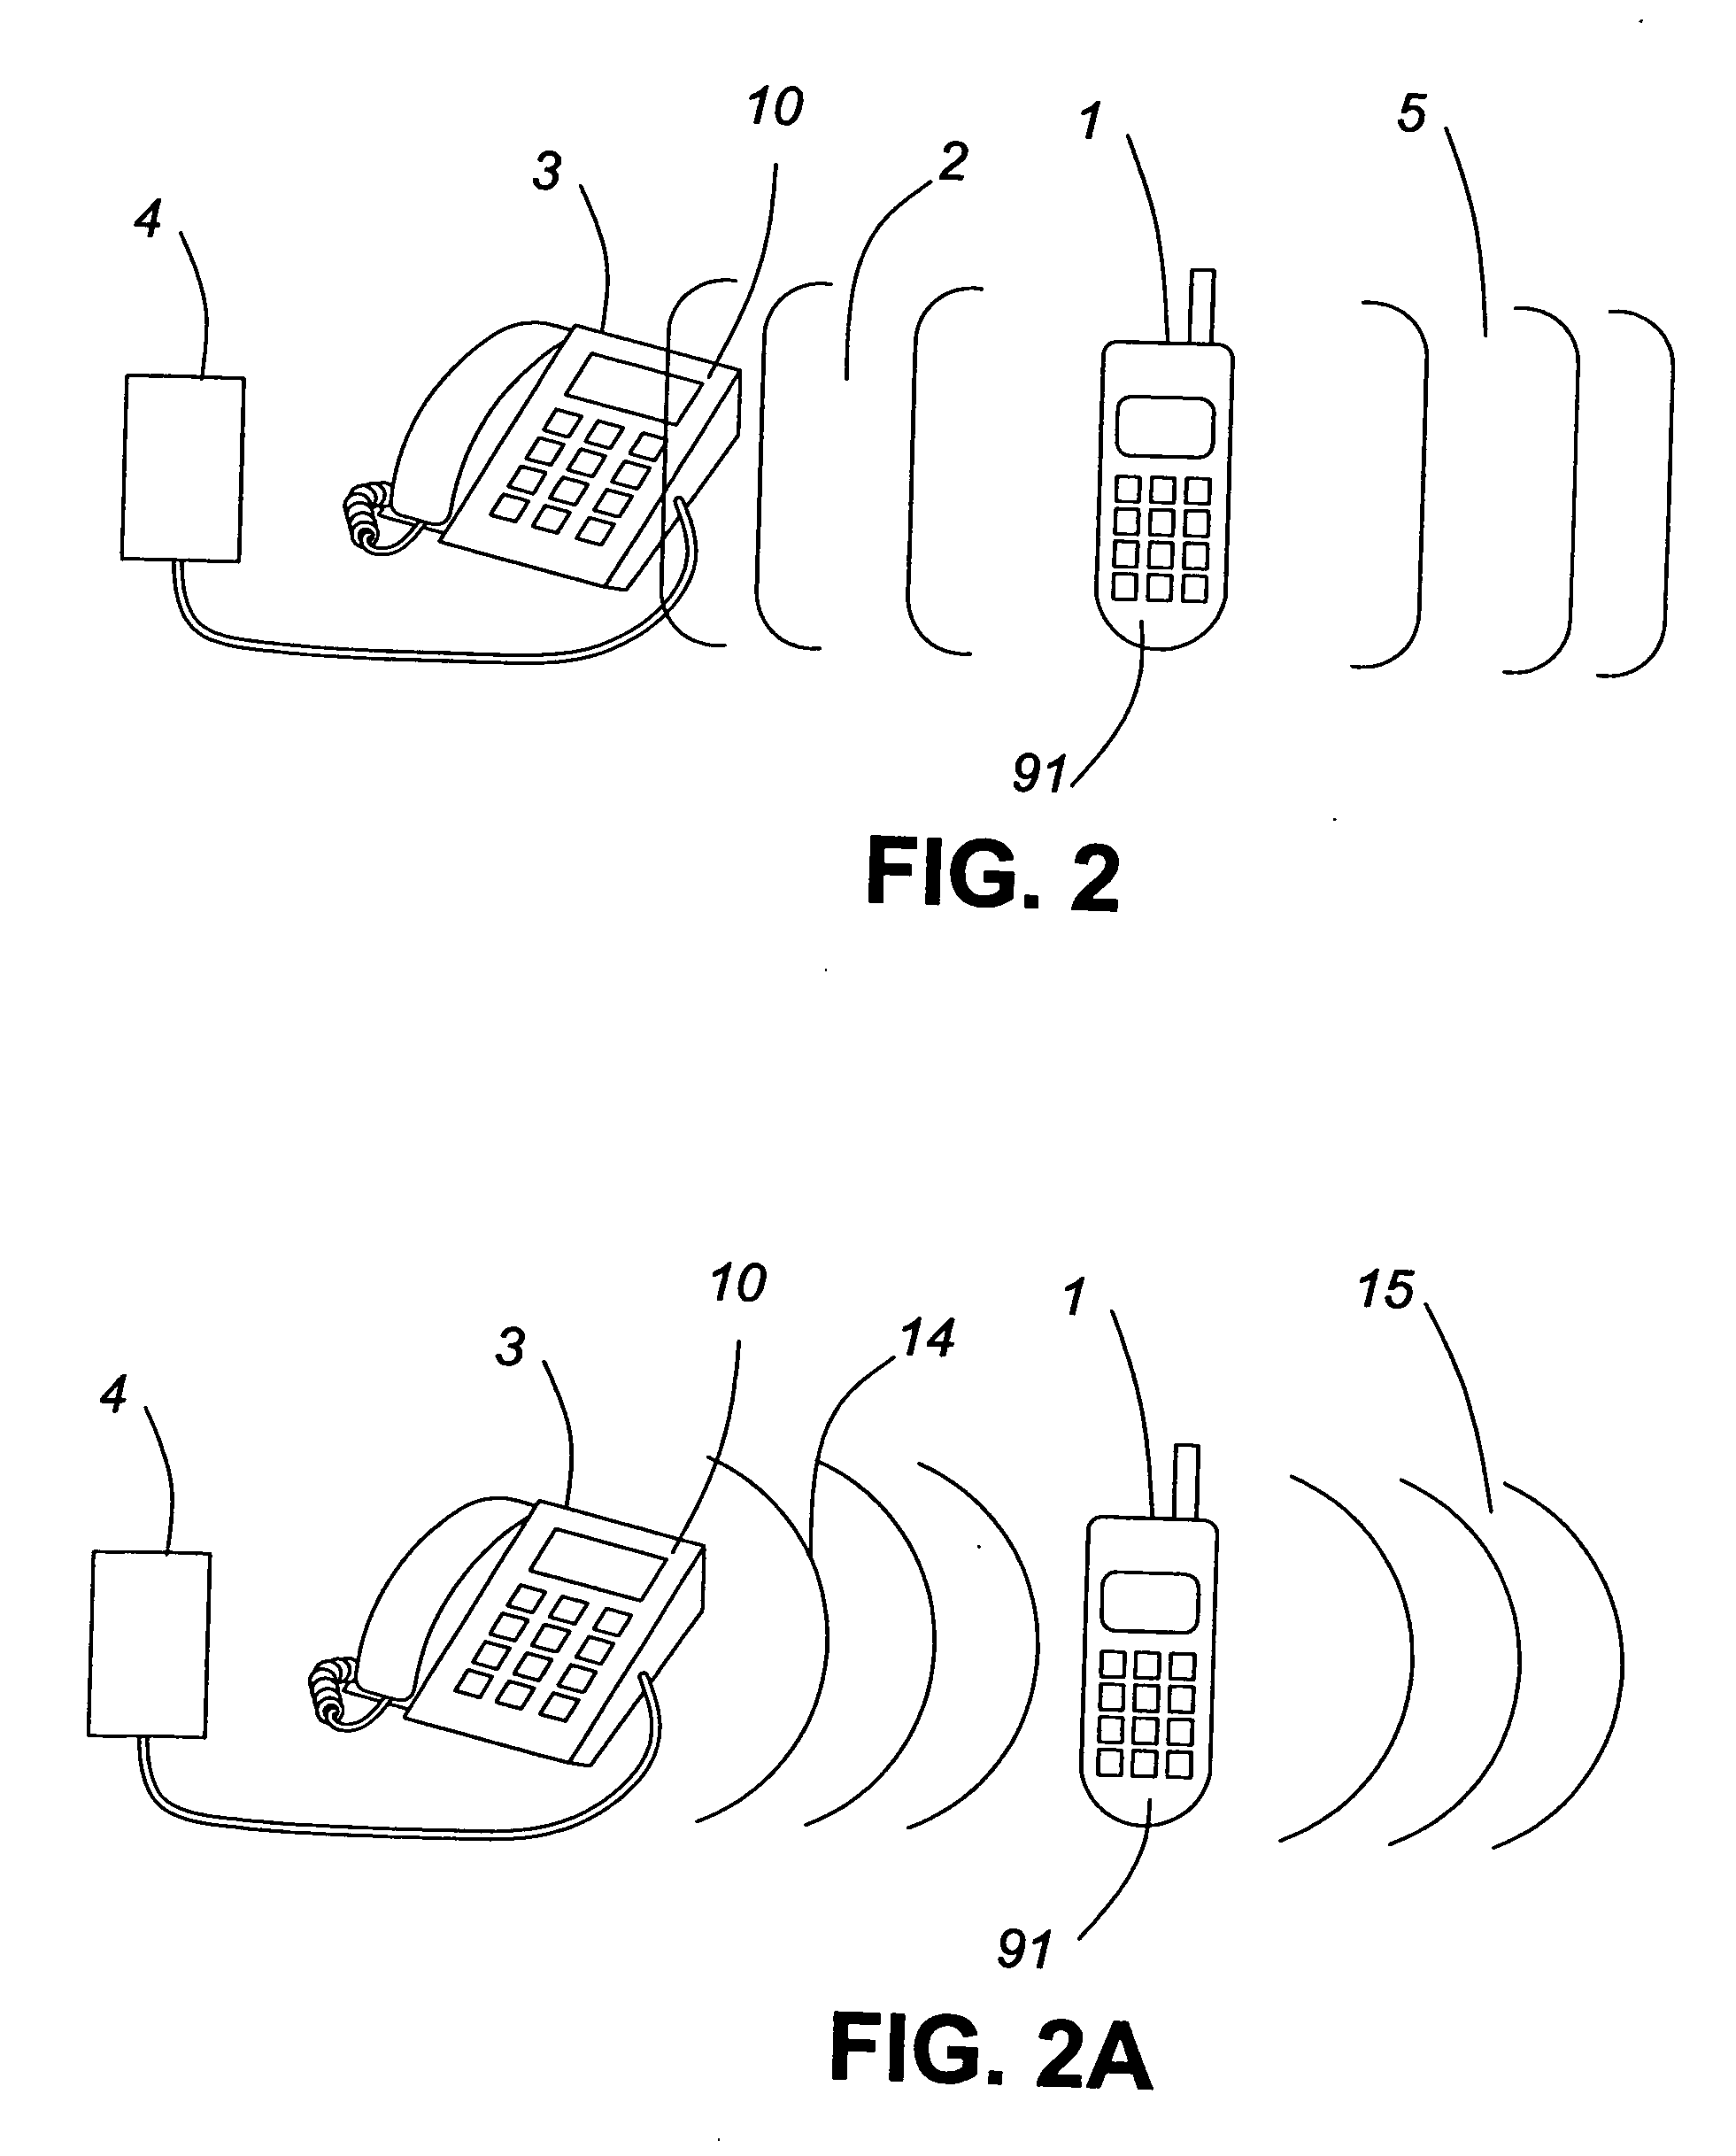 System and method for providing the precise location of a cell phone making an emergency call